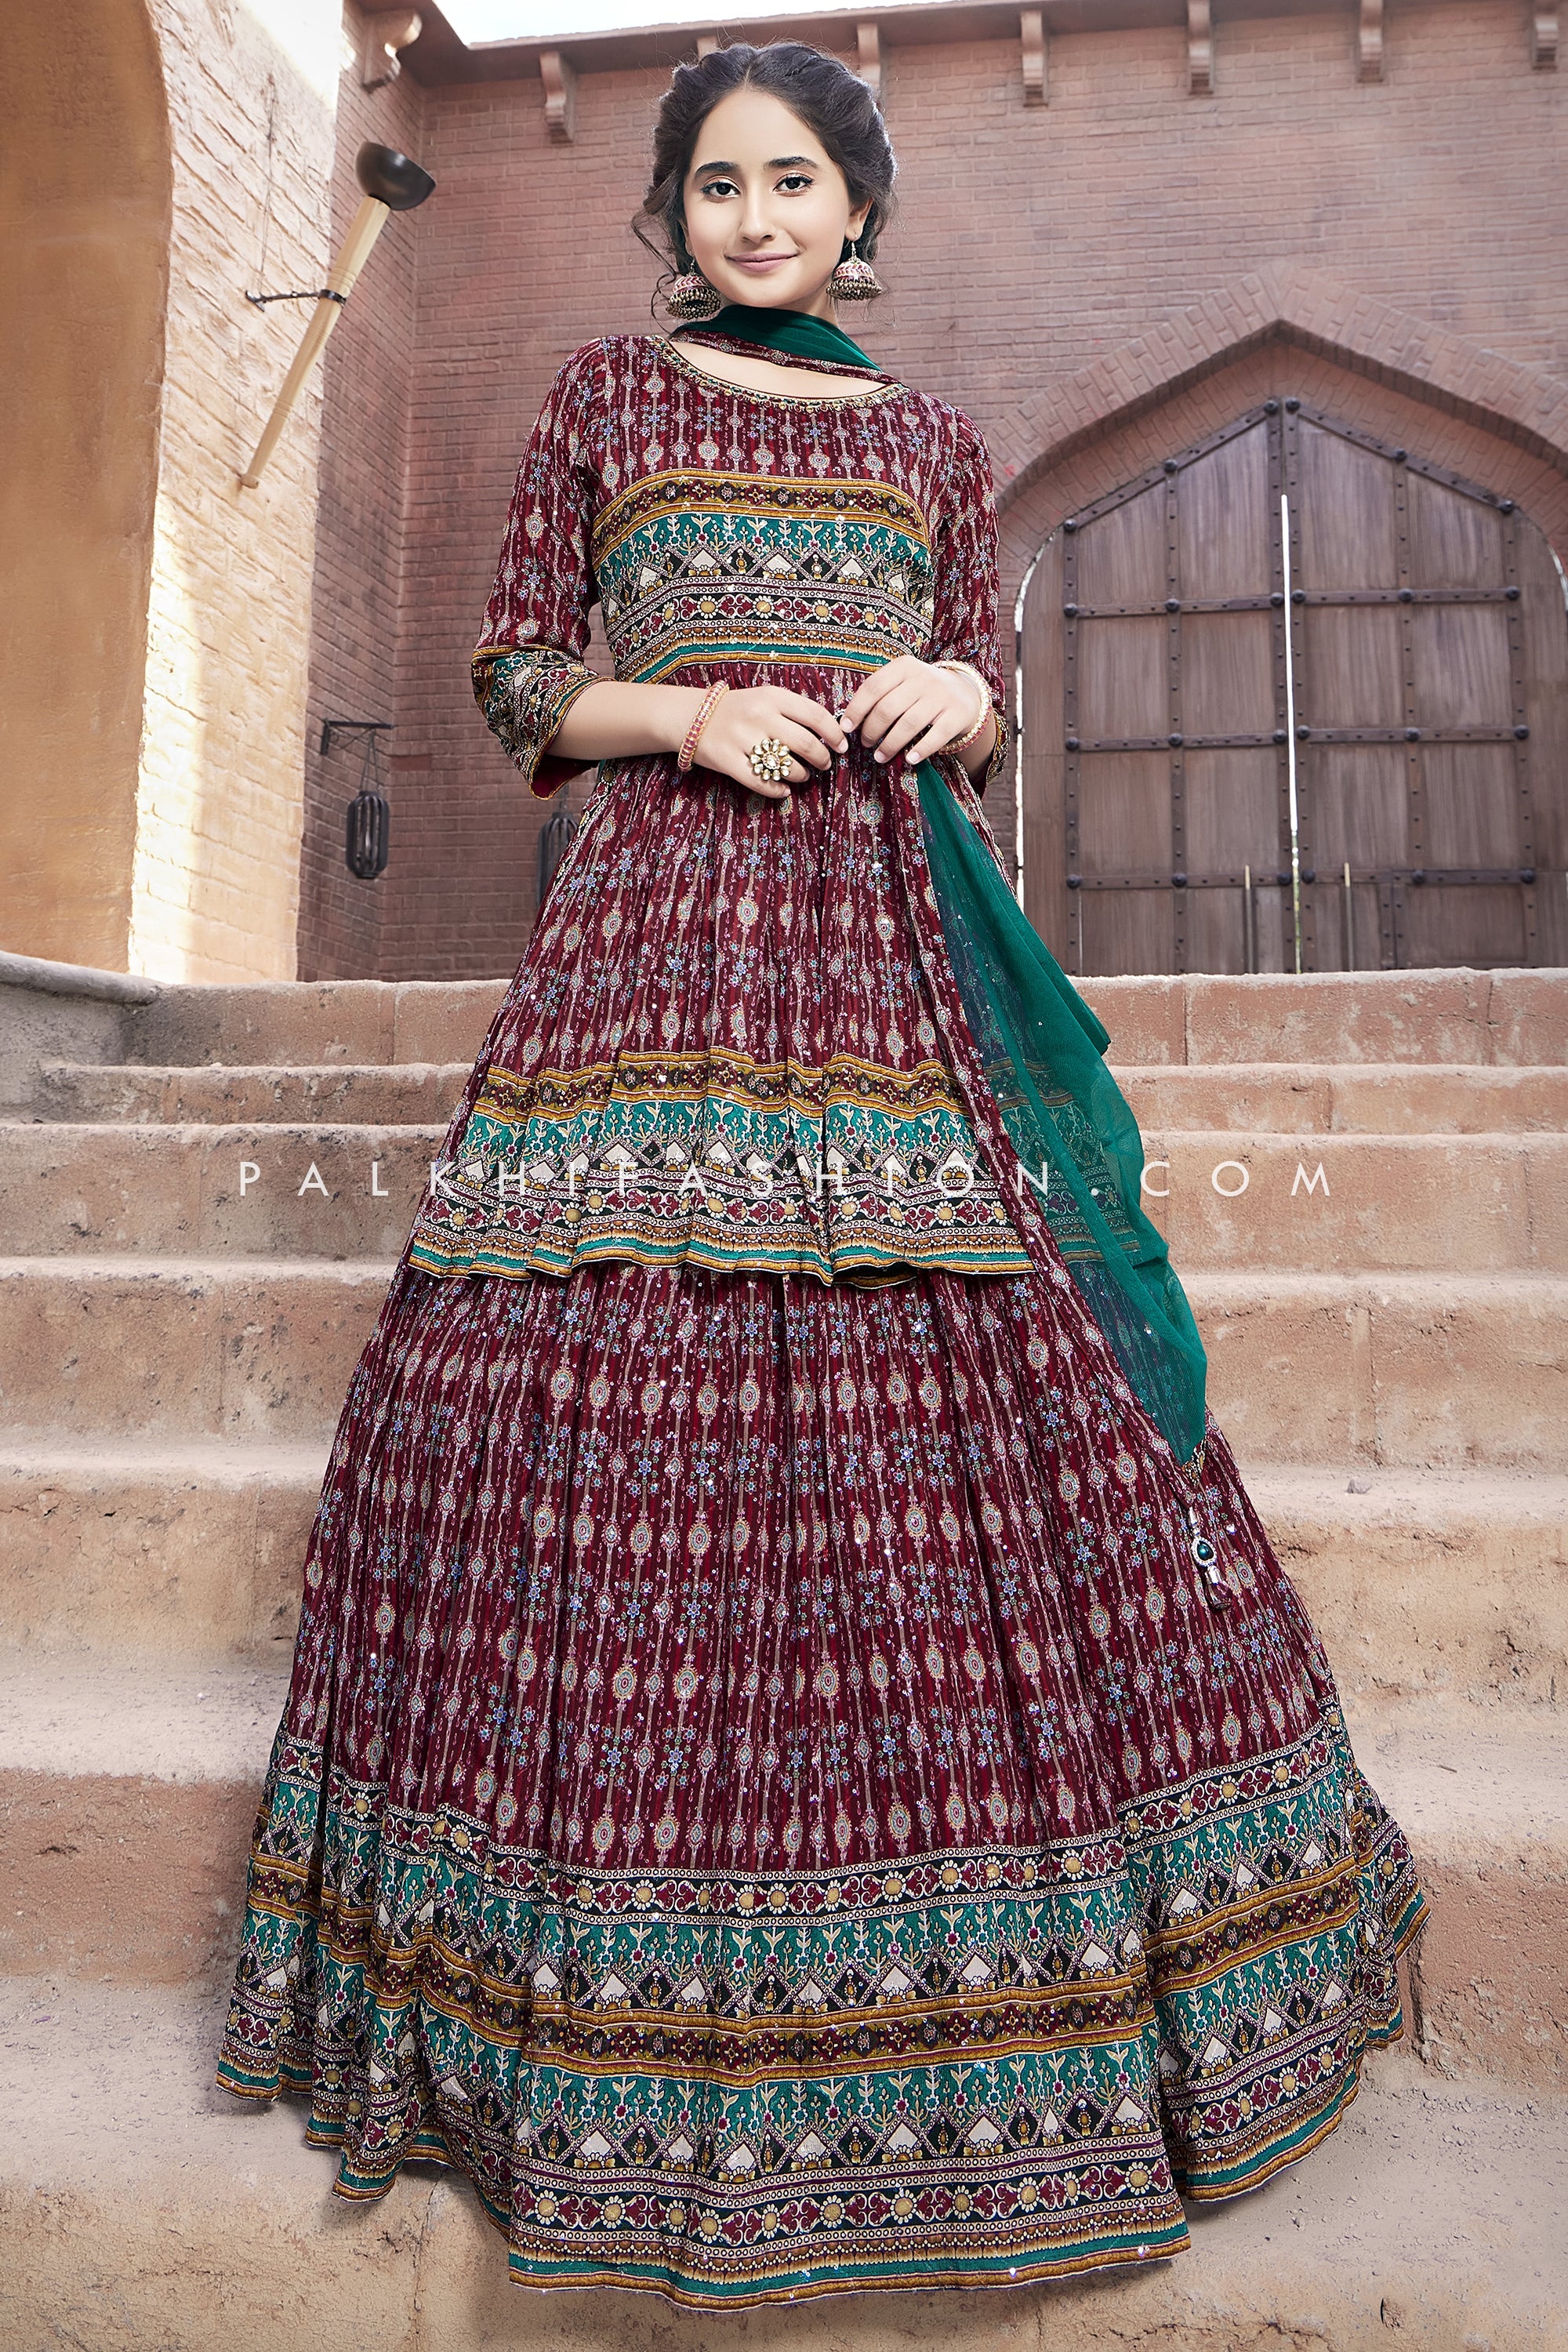 MISS CLOTHING Anarkali Gown Price in India - Buy MISS CLOTHING Anarkali Gown  online at Flipkart.com